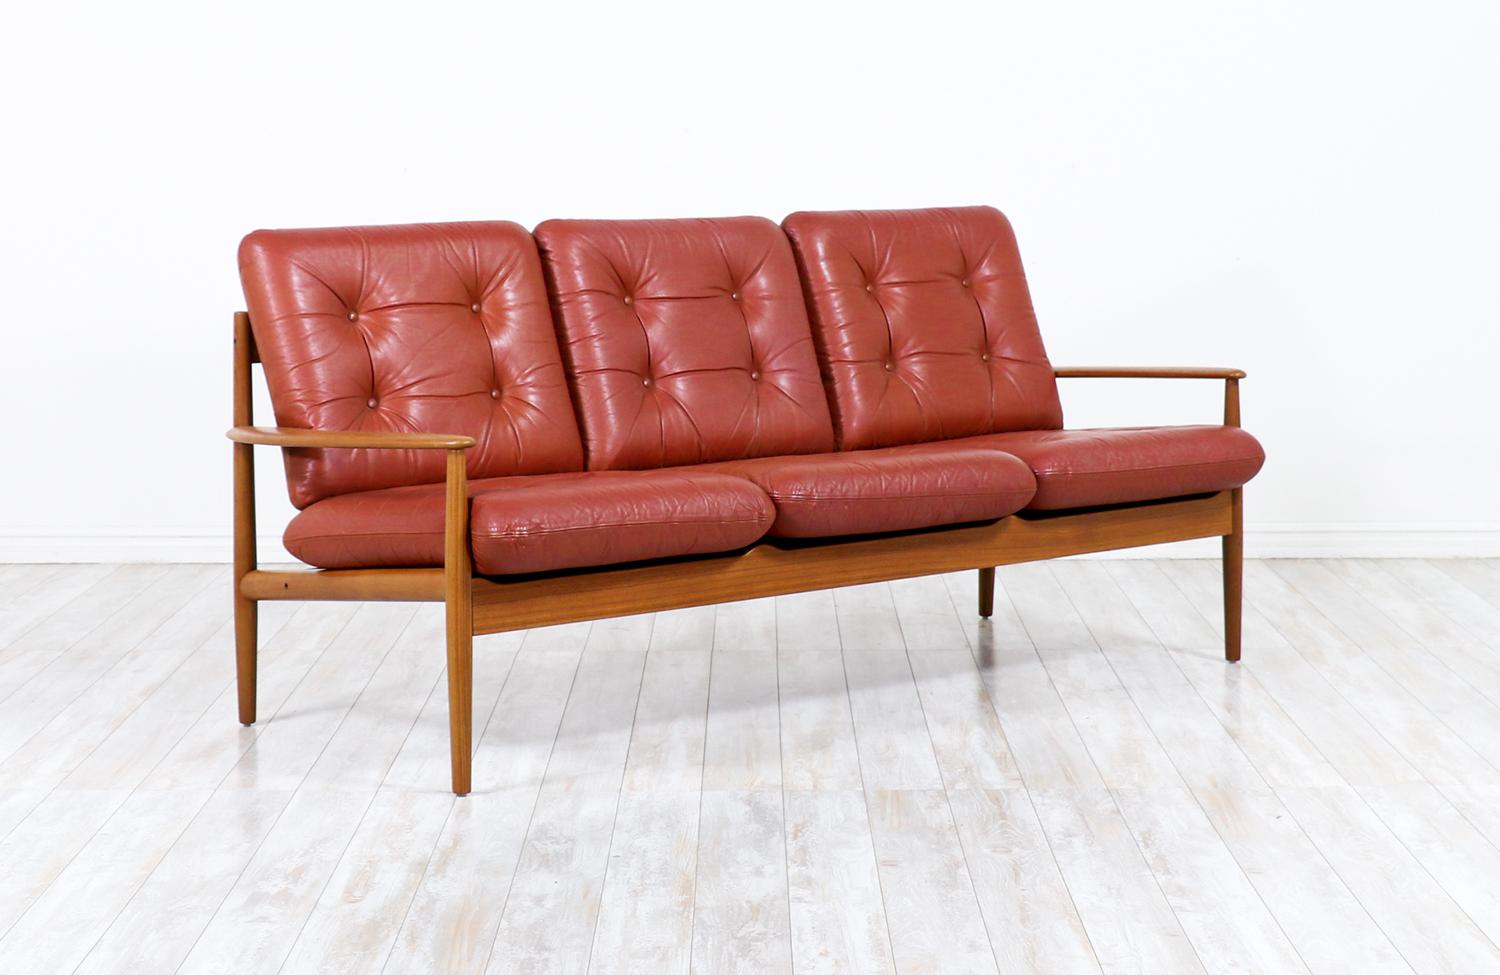 Grete Jalk Model-128 Cognac Leather & Teak 3-Seater Sofa for France & Søn

________________________________________

Transforming a piece of Mid-Century Modern furniture is like bringing history back to life, and we take this journey with passion